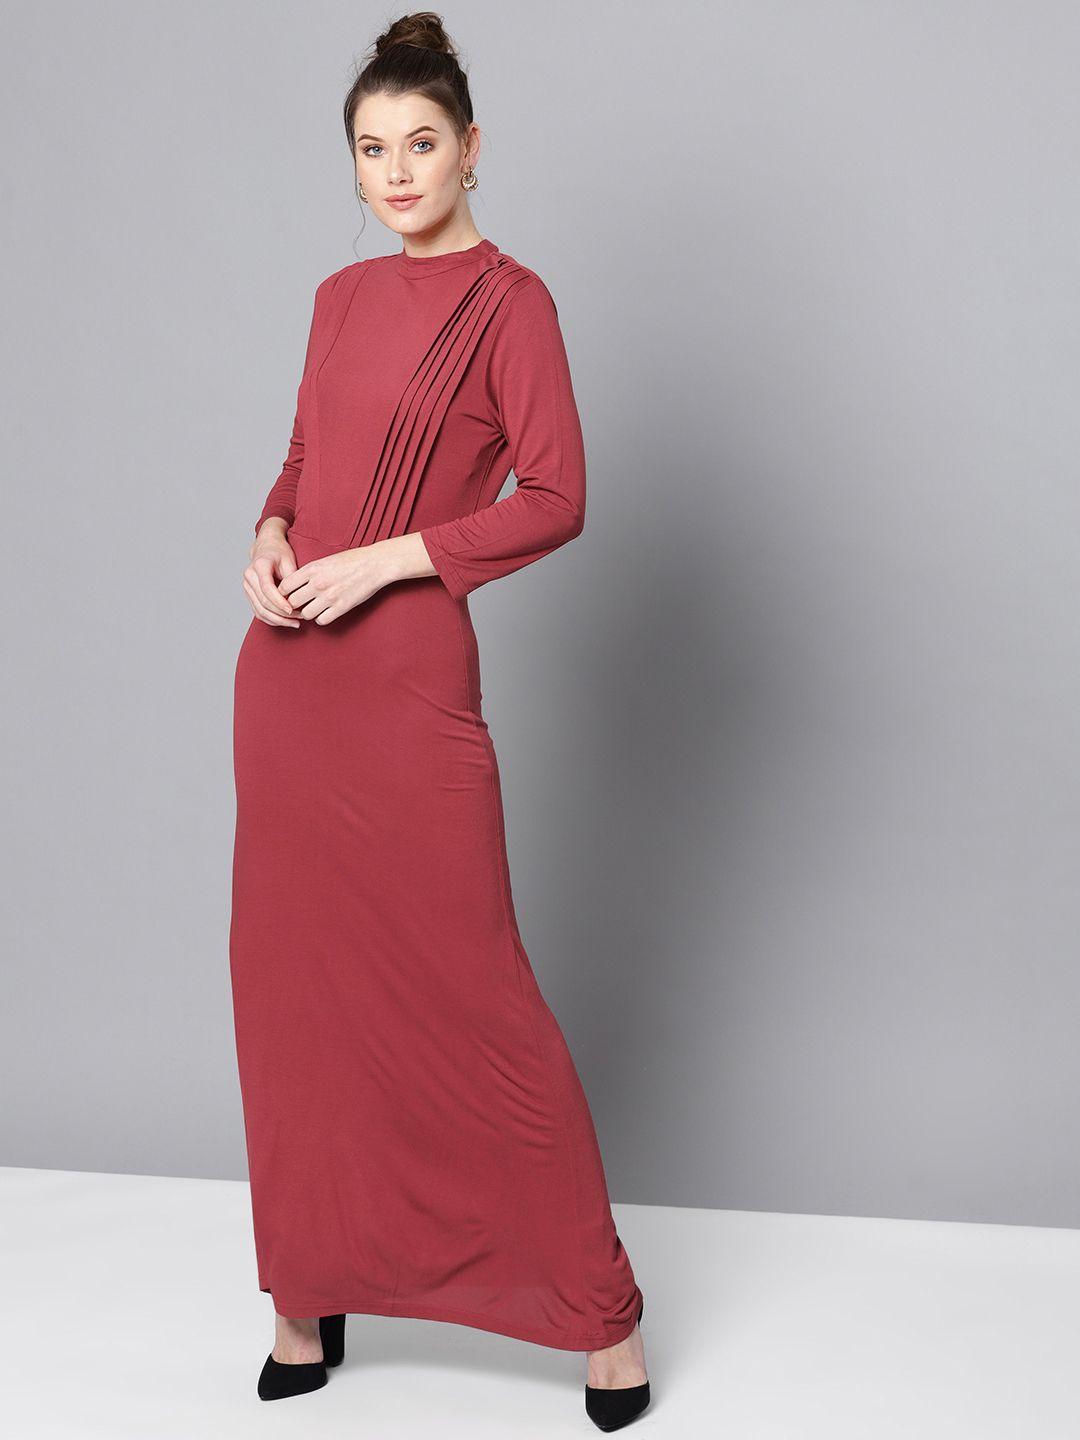 marie claire women maroon solid maxi dress